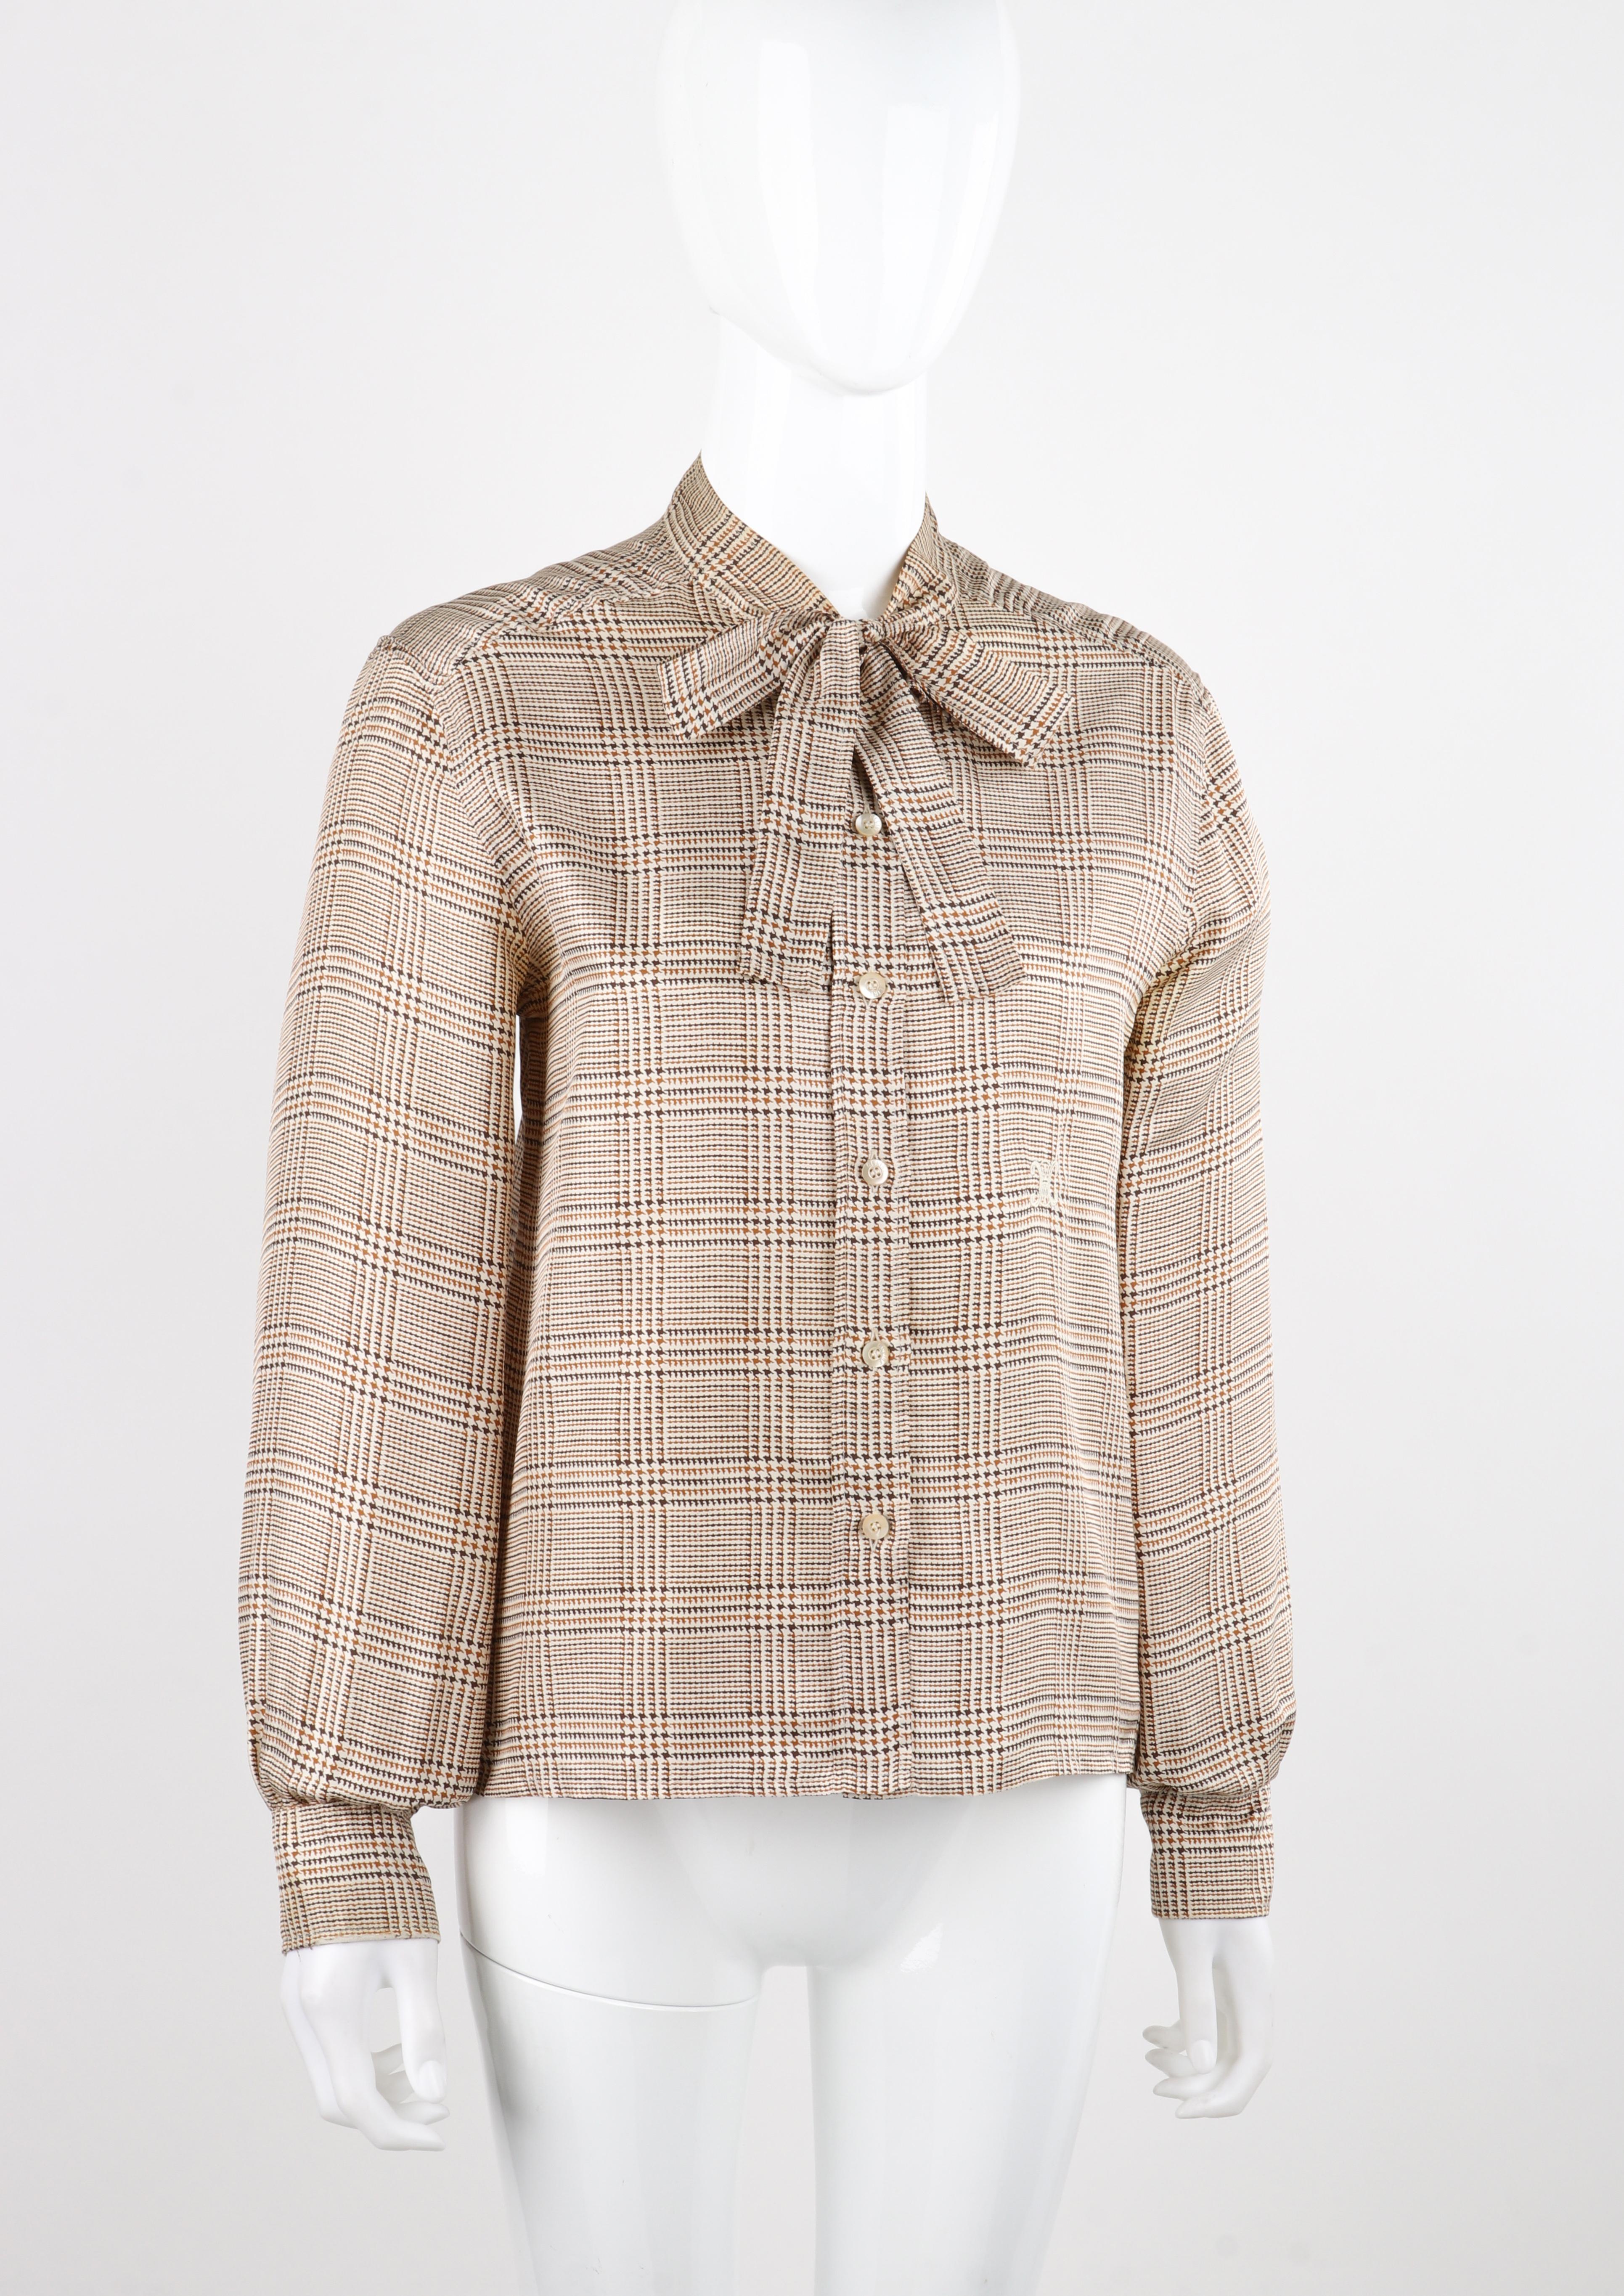 Women's CELINE c.1970's Brown Tan Silk Houndstooth Print Pussybow Button Up Blouse Top For Sale